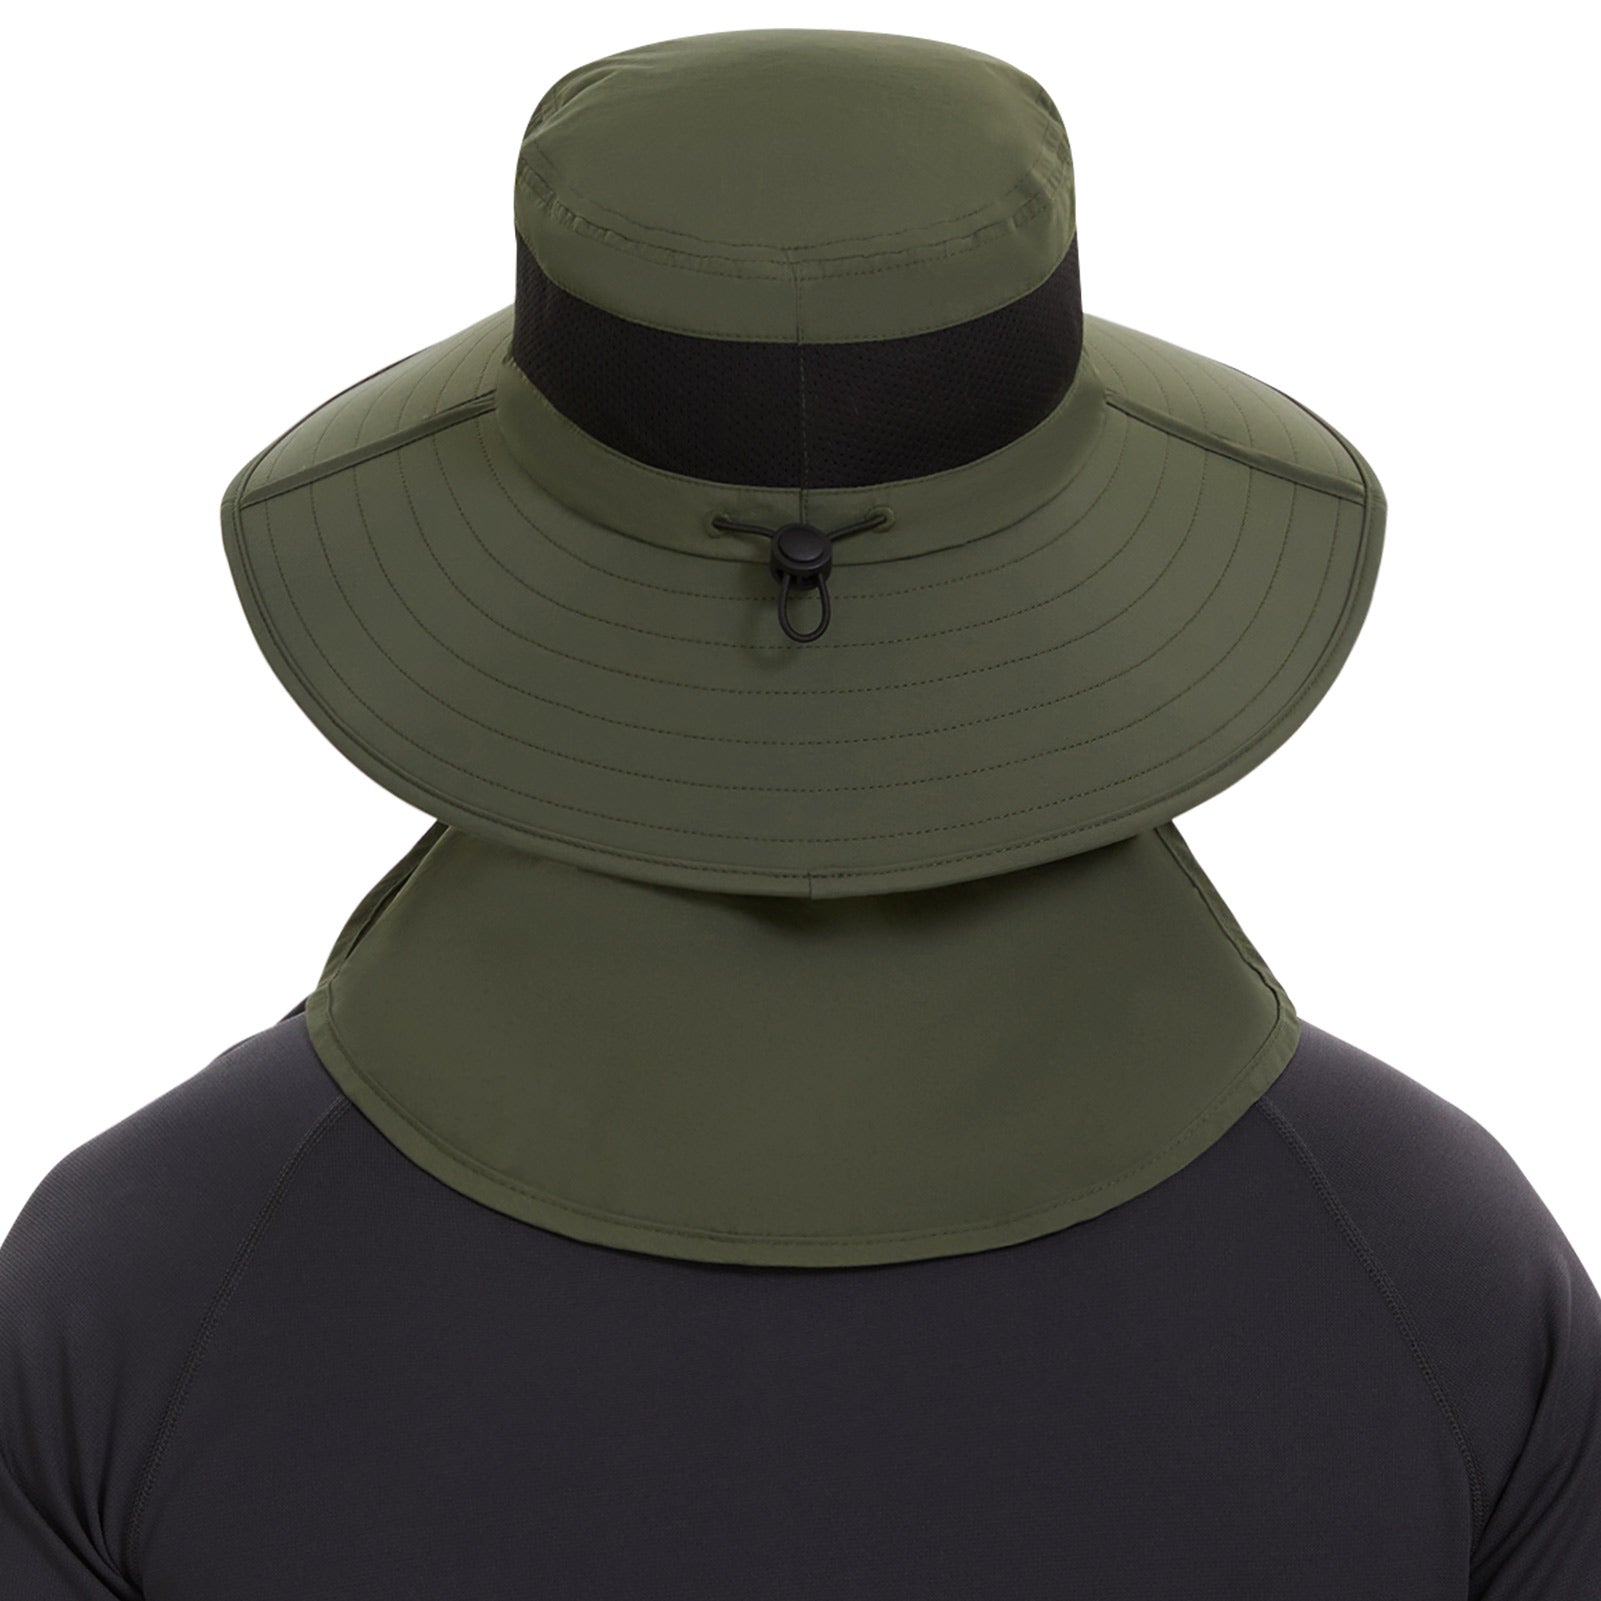 12 Wholesale Camouflage Sun Summer Hat for Men - Wide Visor with Neck Flap  - at 